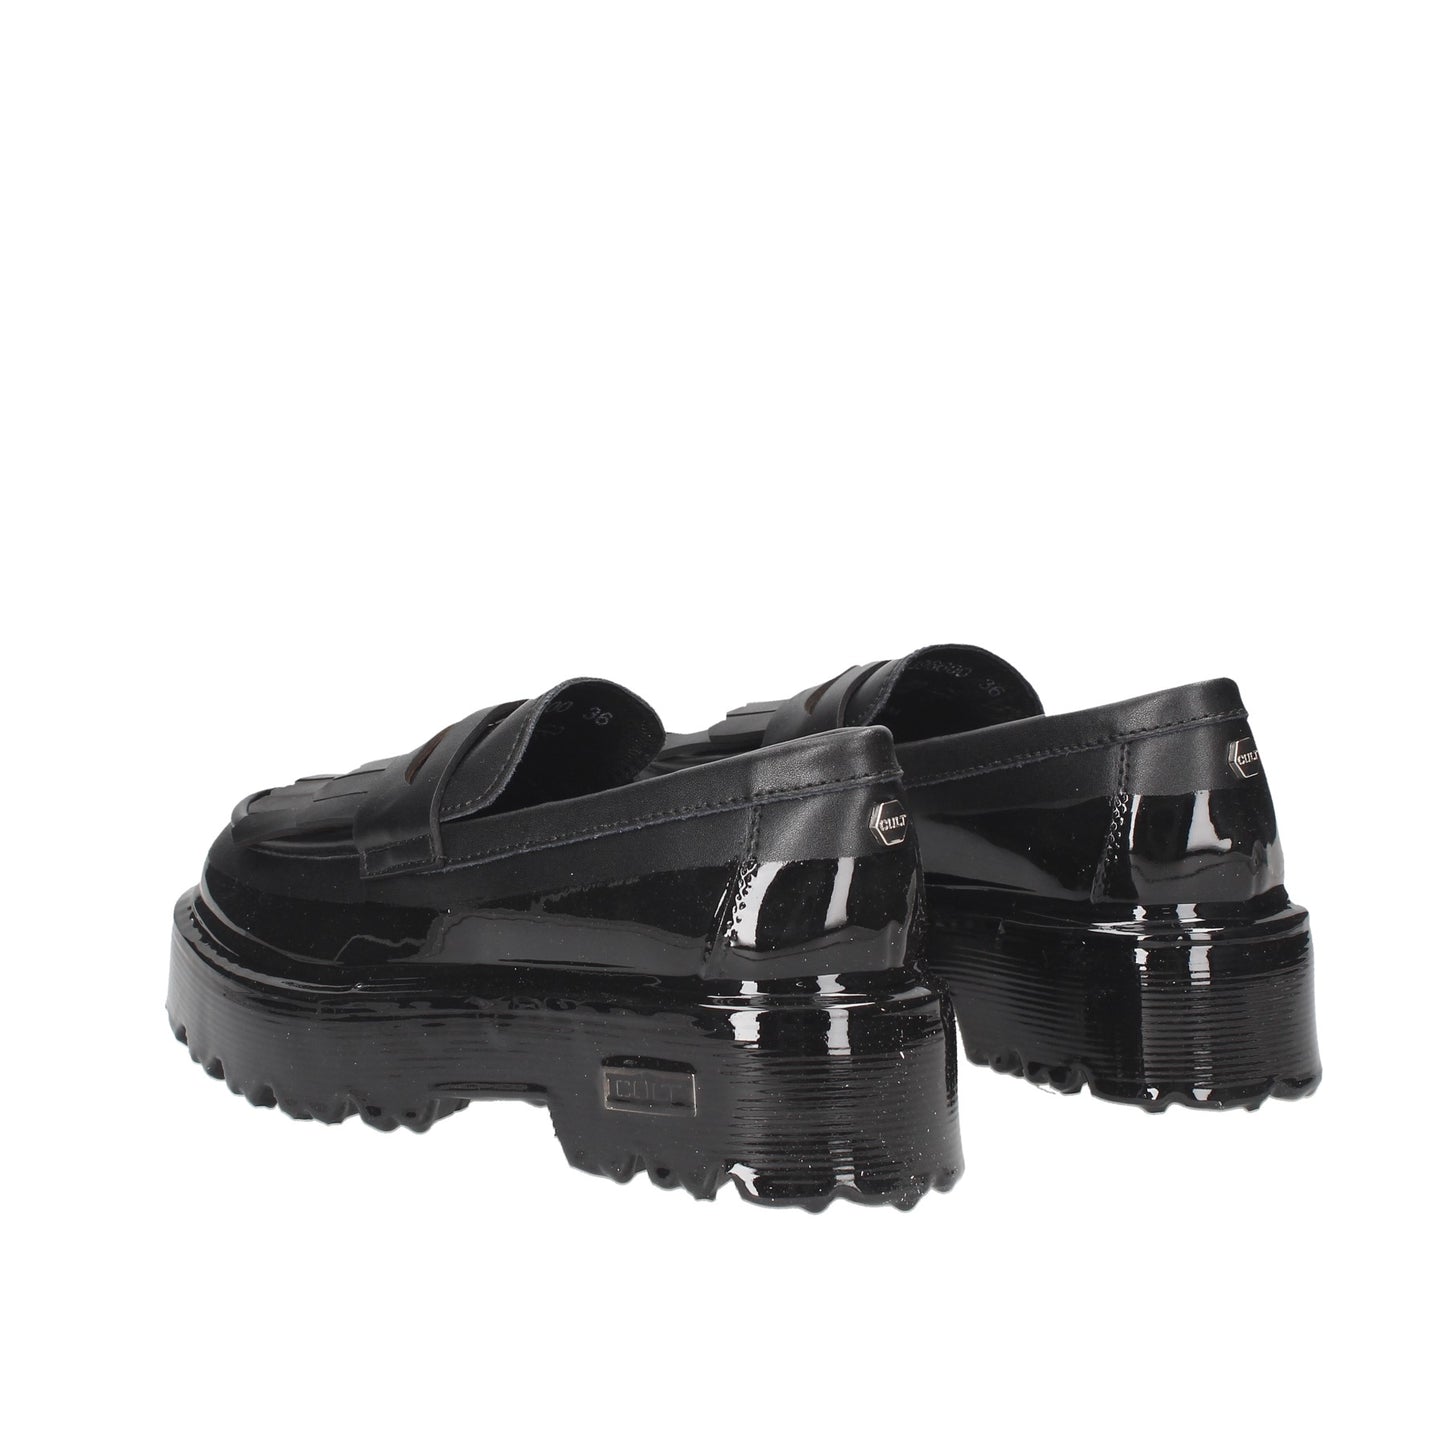 CLW398600 CULT moccasin